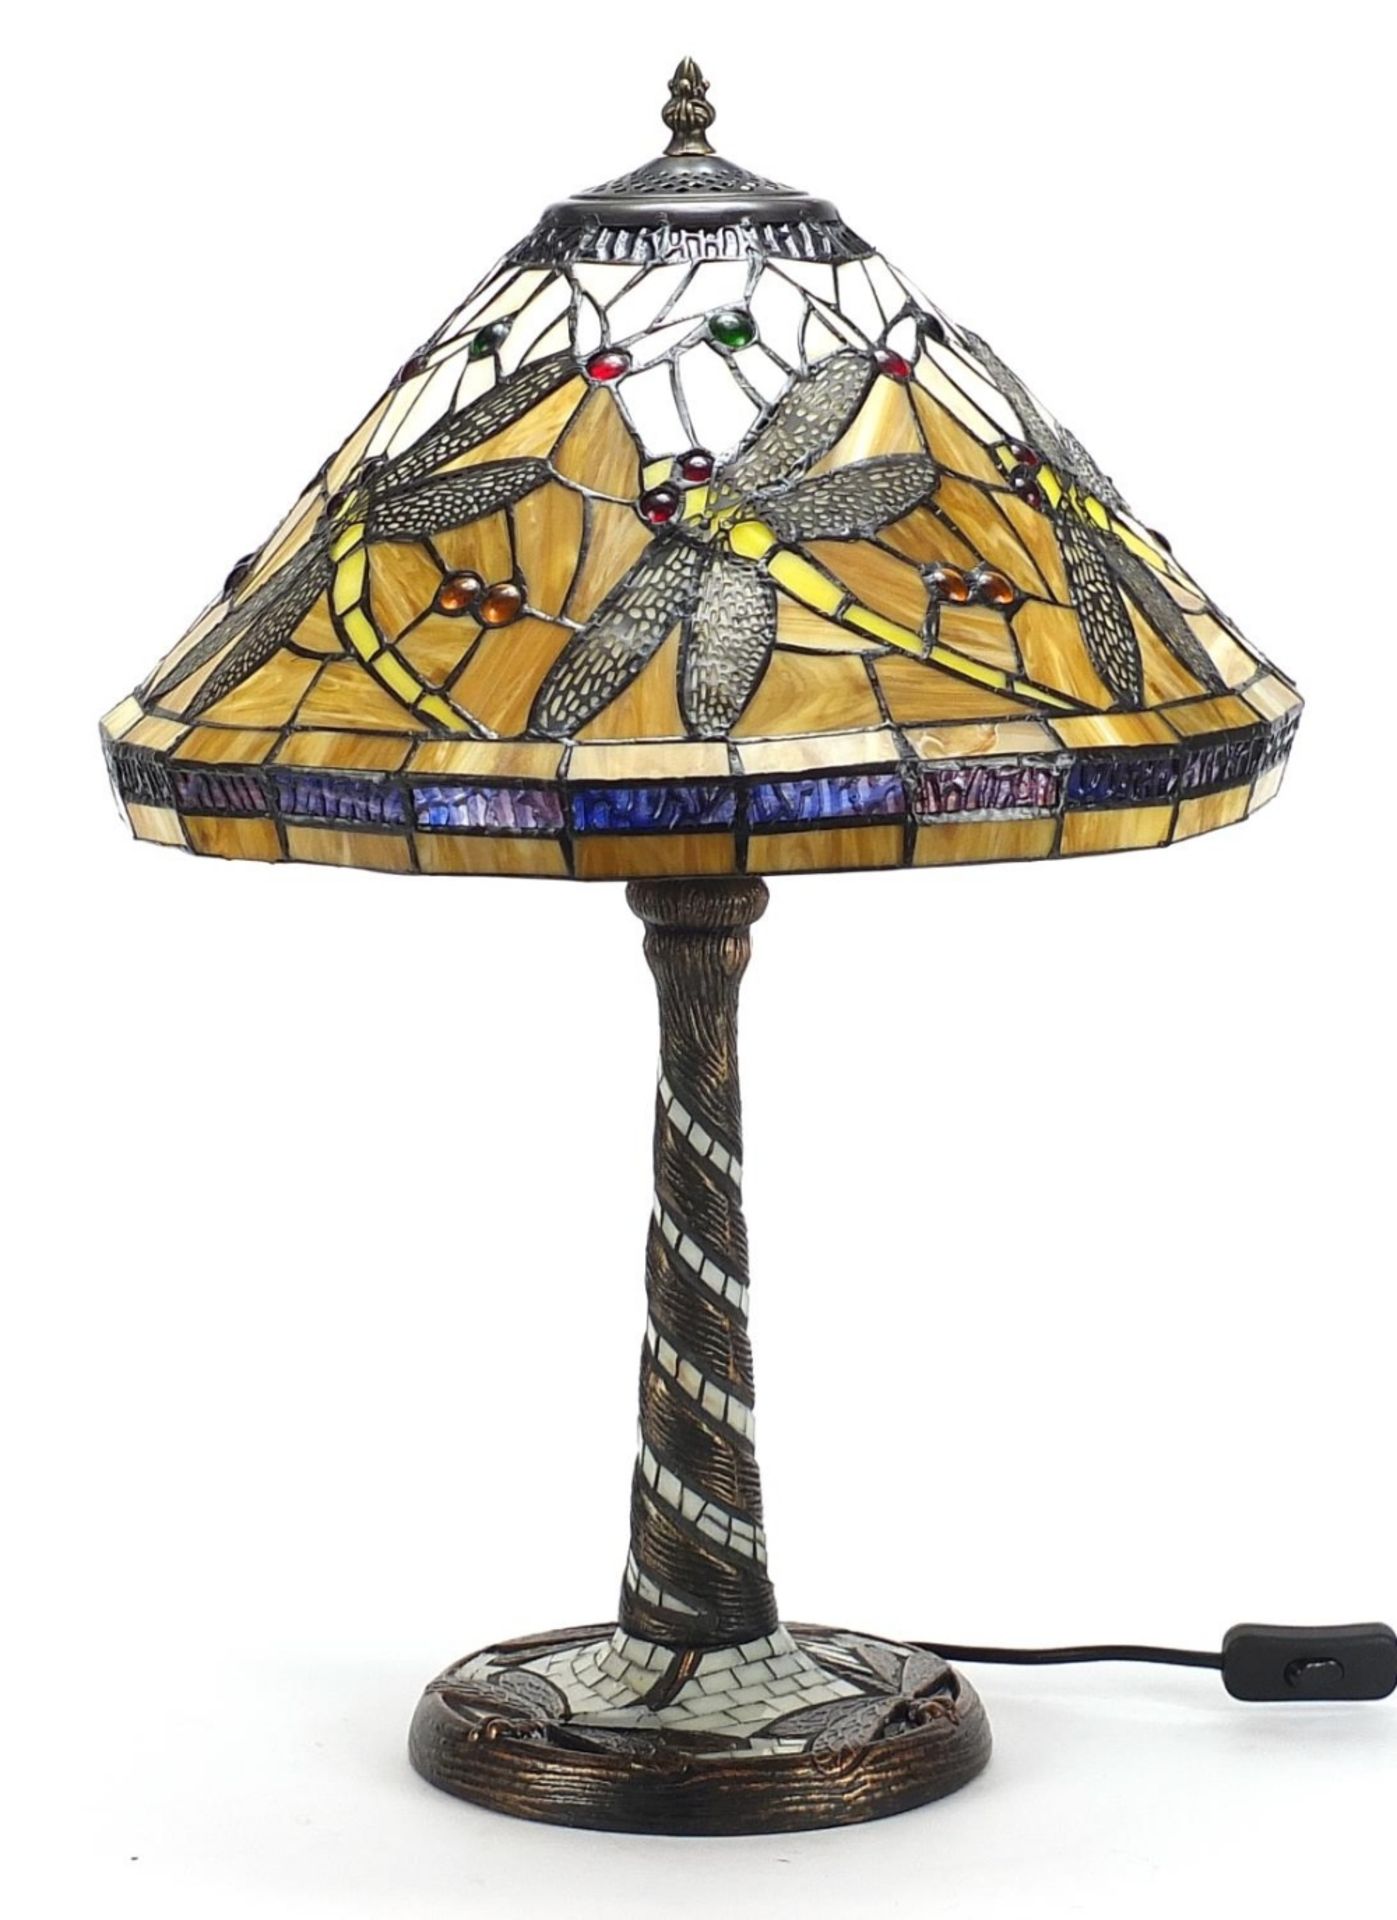 Bronzed Tiffany design leaded glass table lamp and shade decorated with dragonflies, 58cm high :